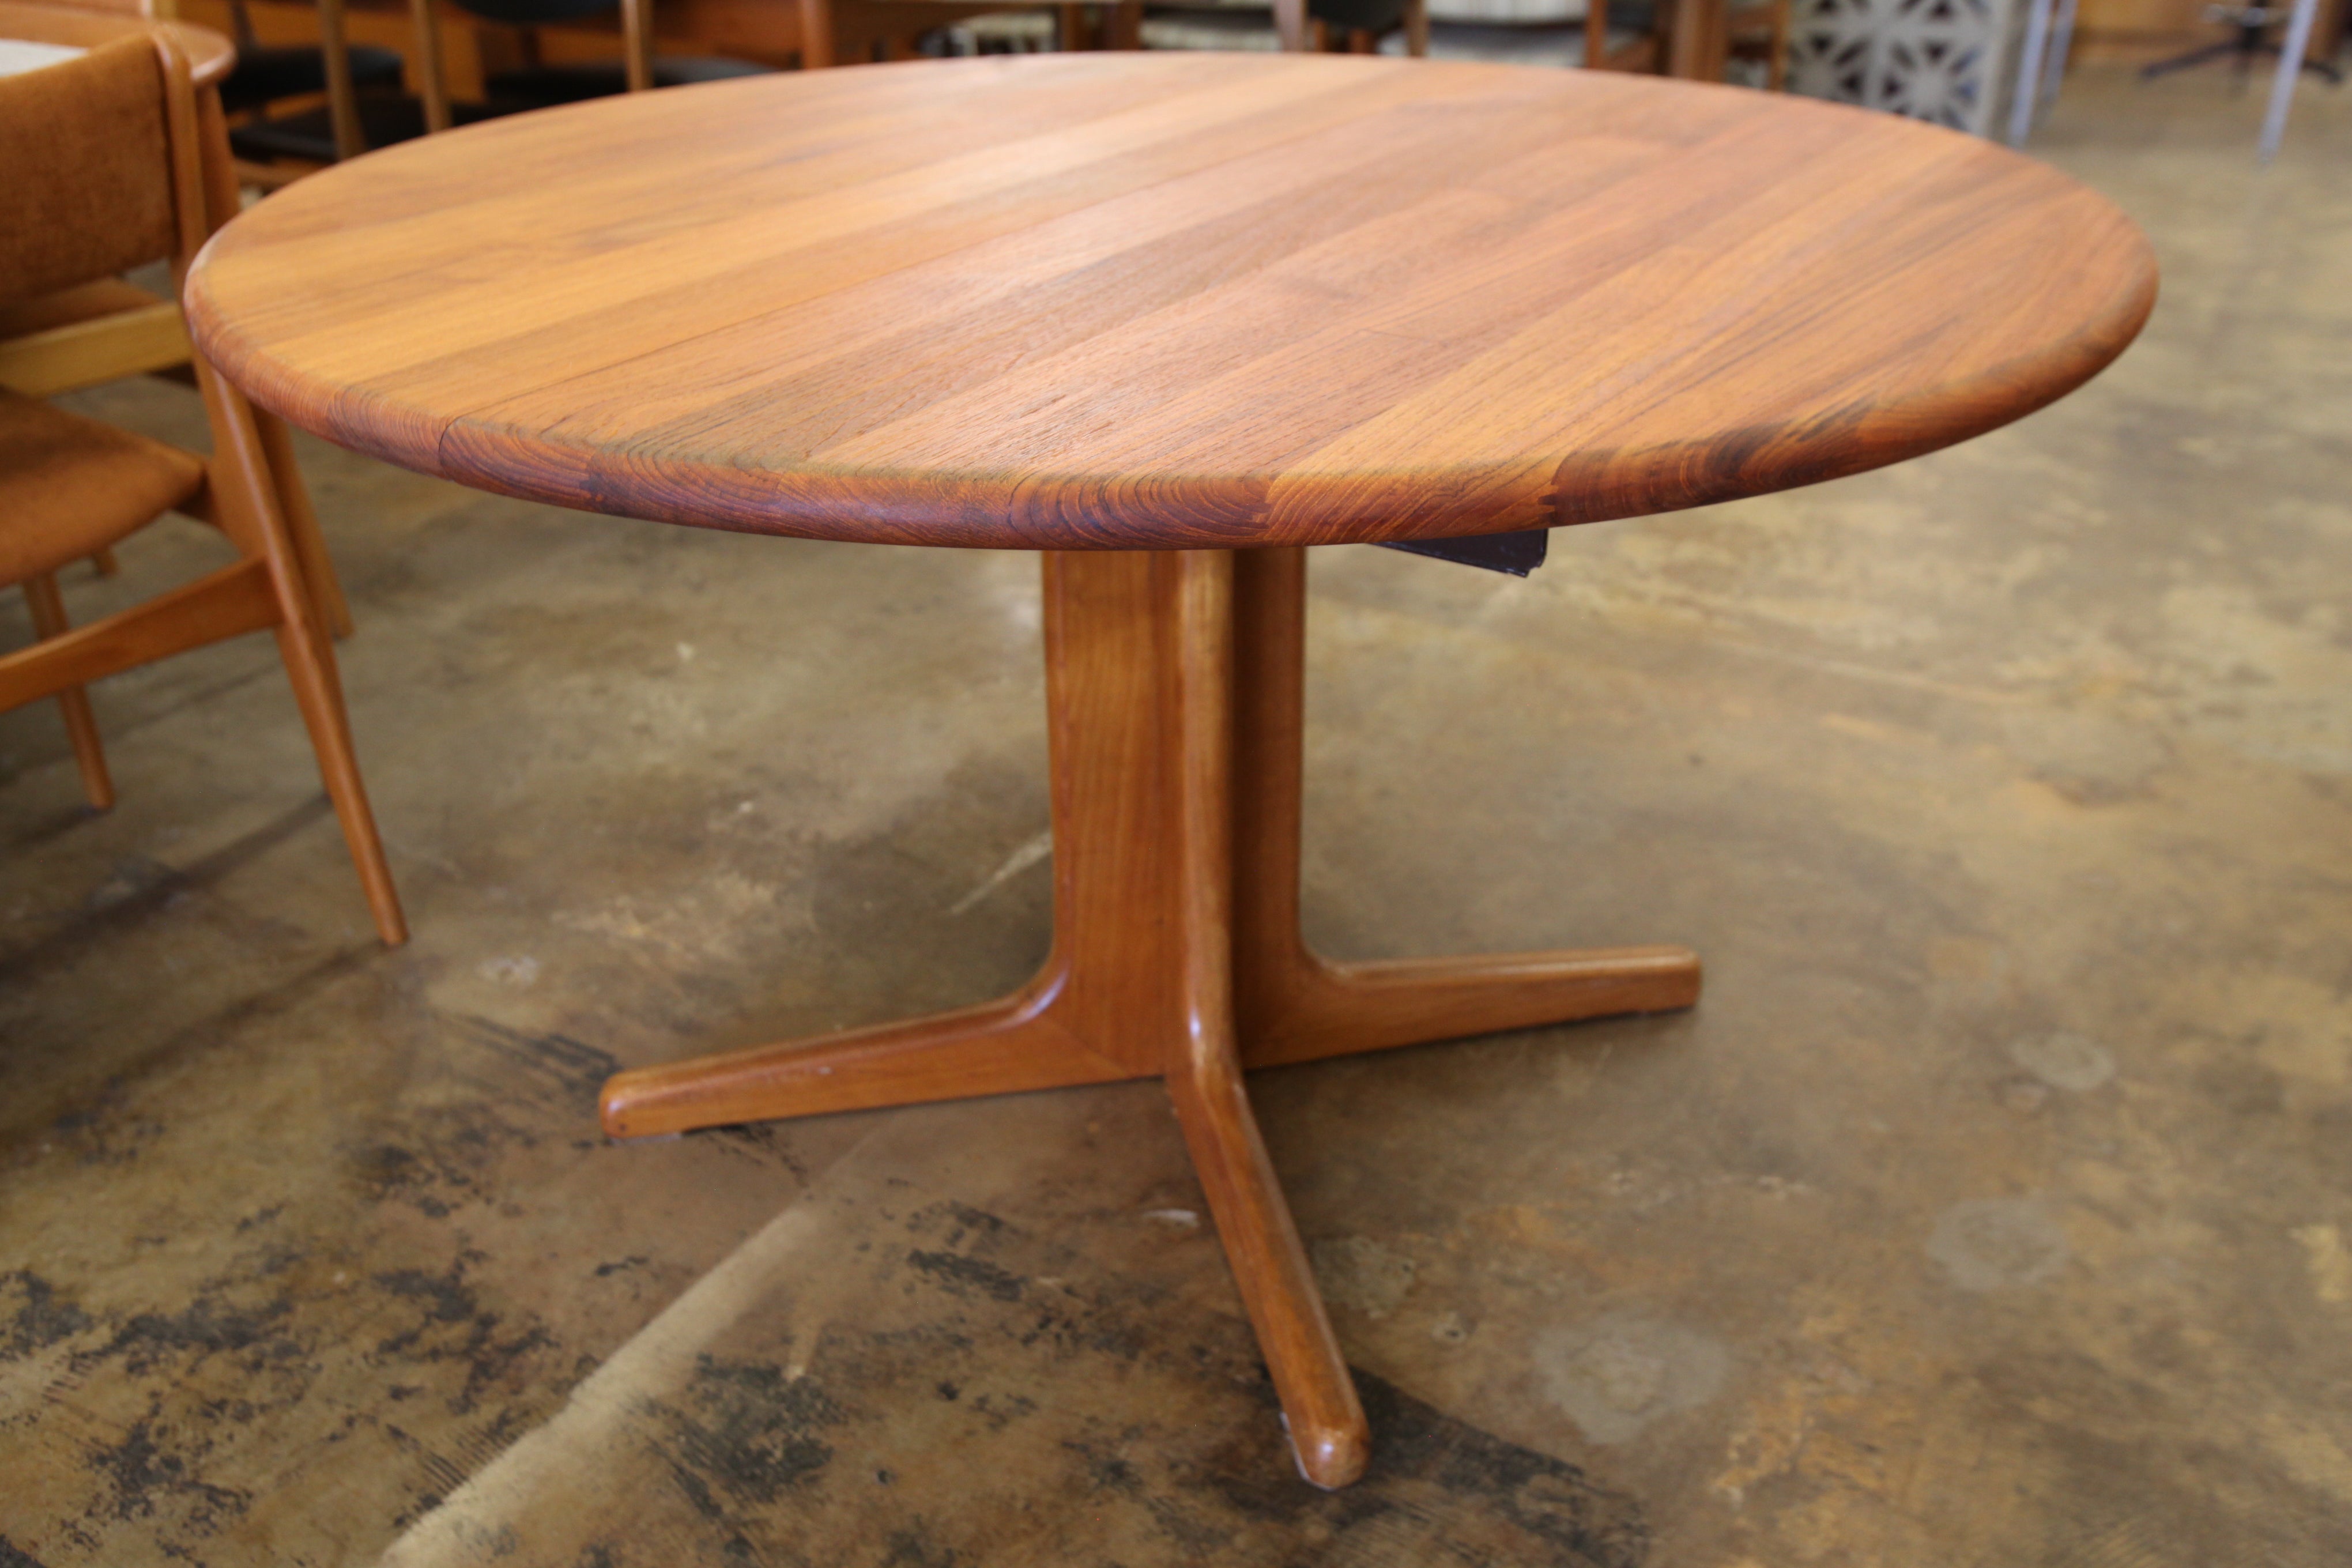 Vintage "Solid Teak" Round Dining Table w/ 2 Leafs